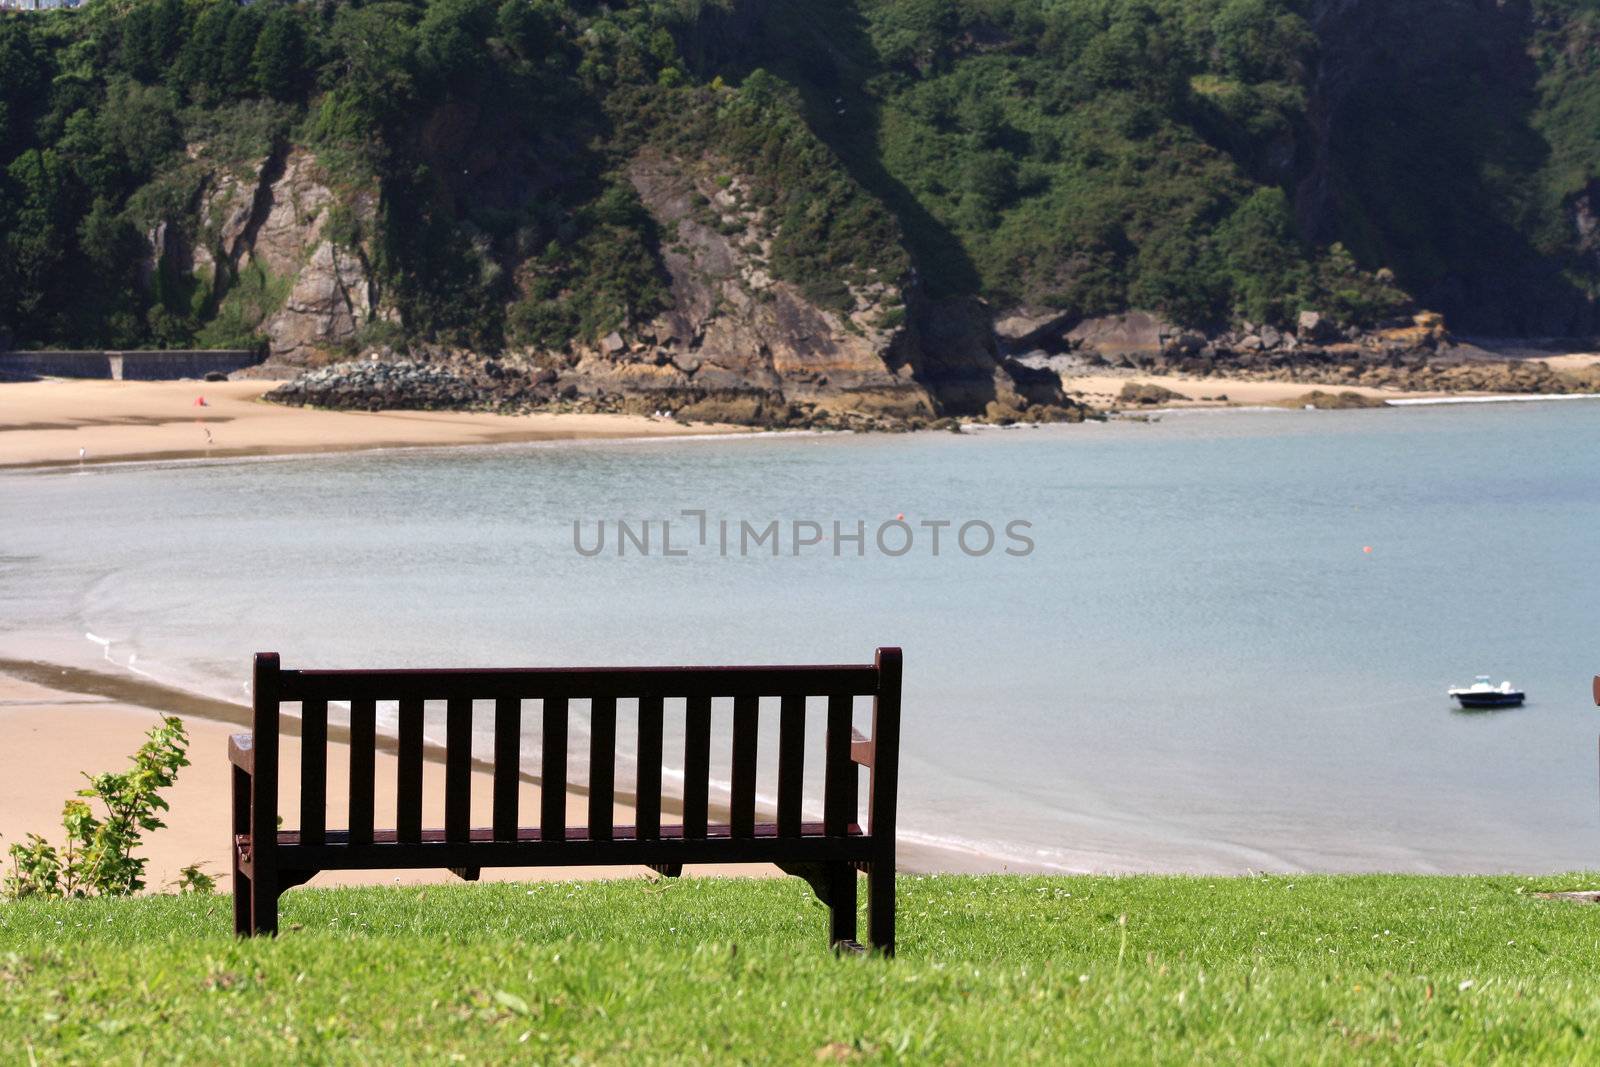 North Beach of Tenby, Wales, viewed from a bench on a hill.